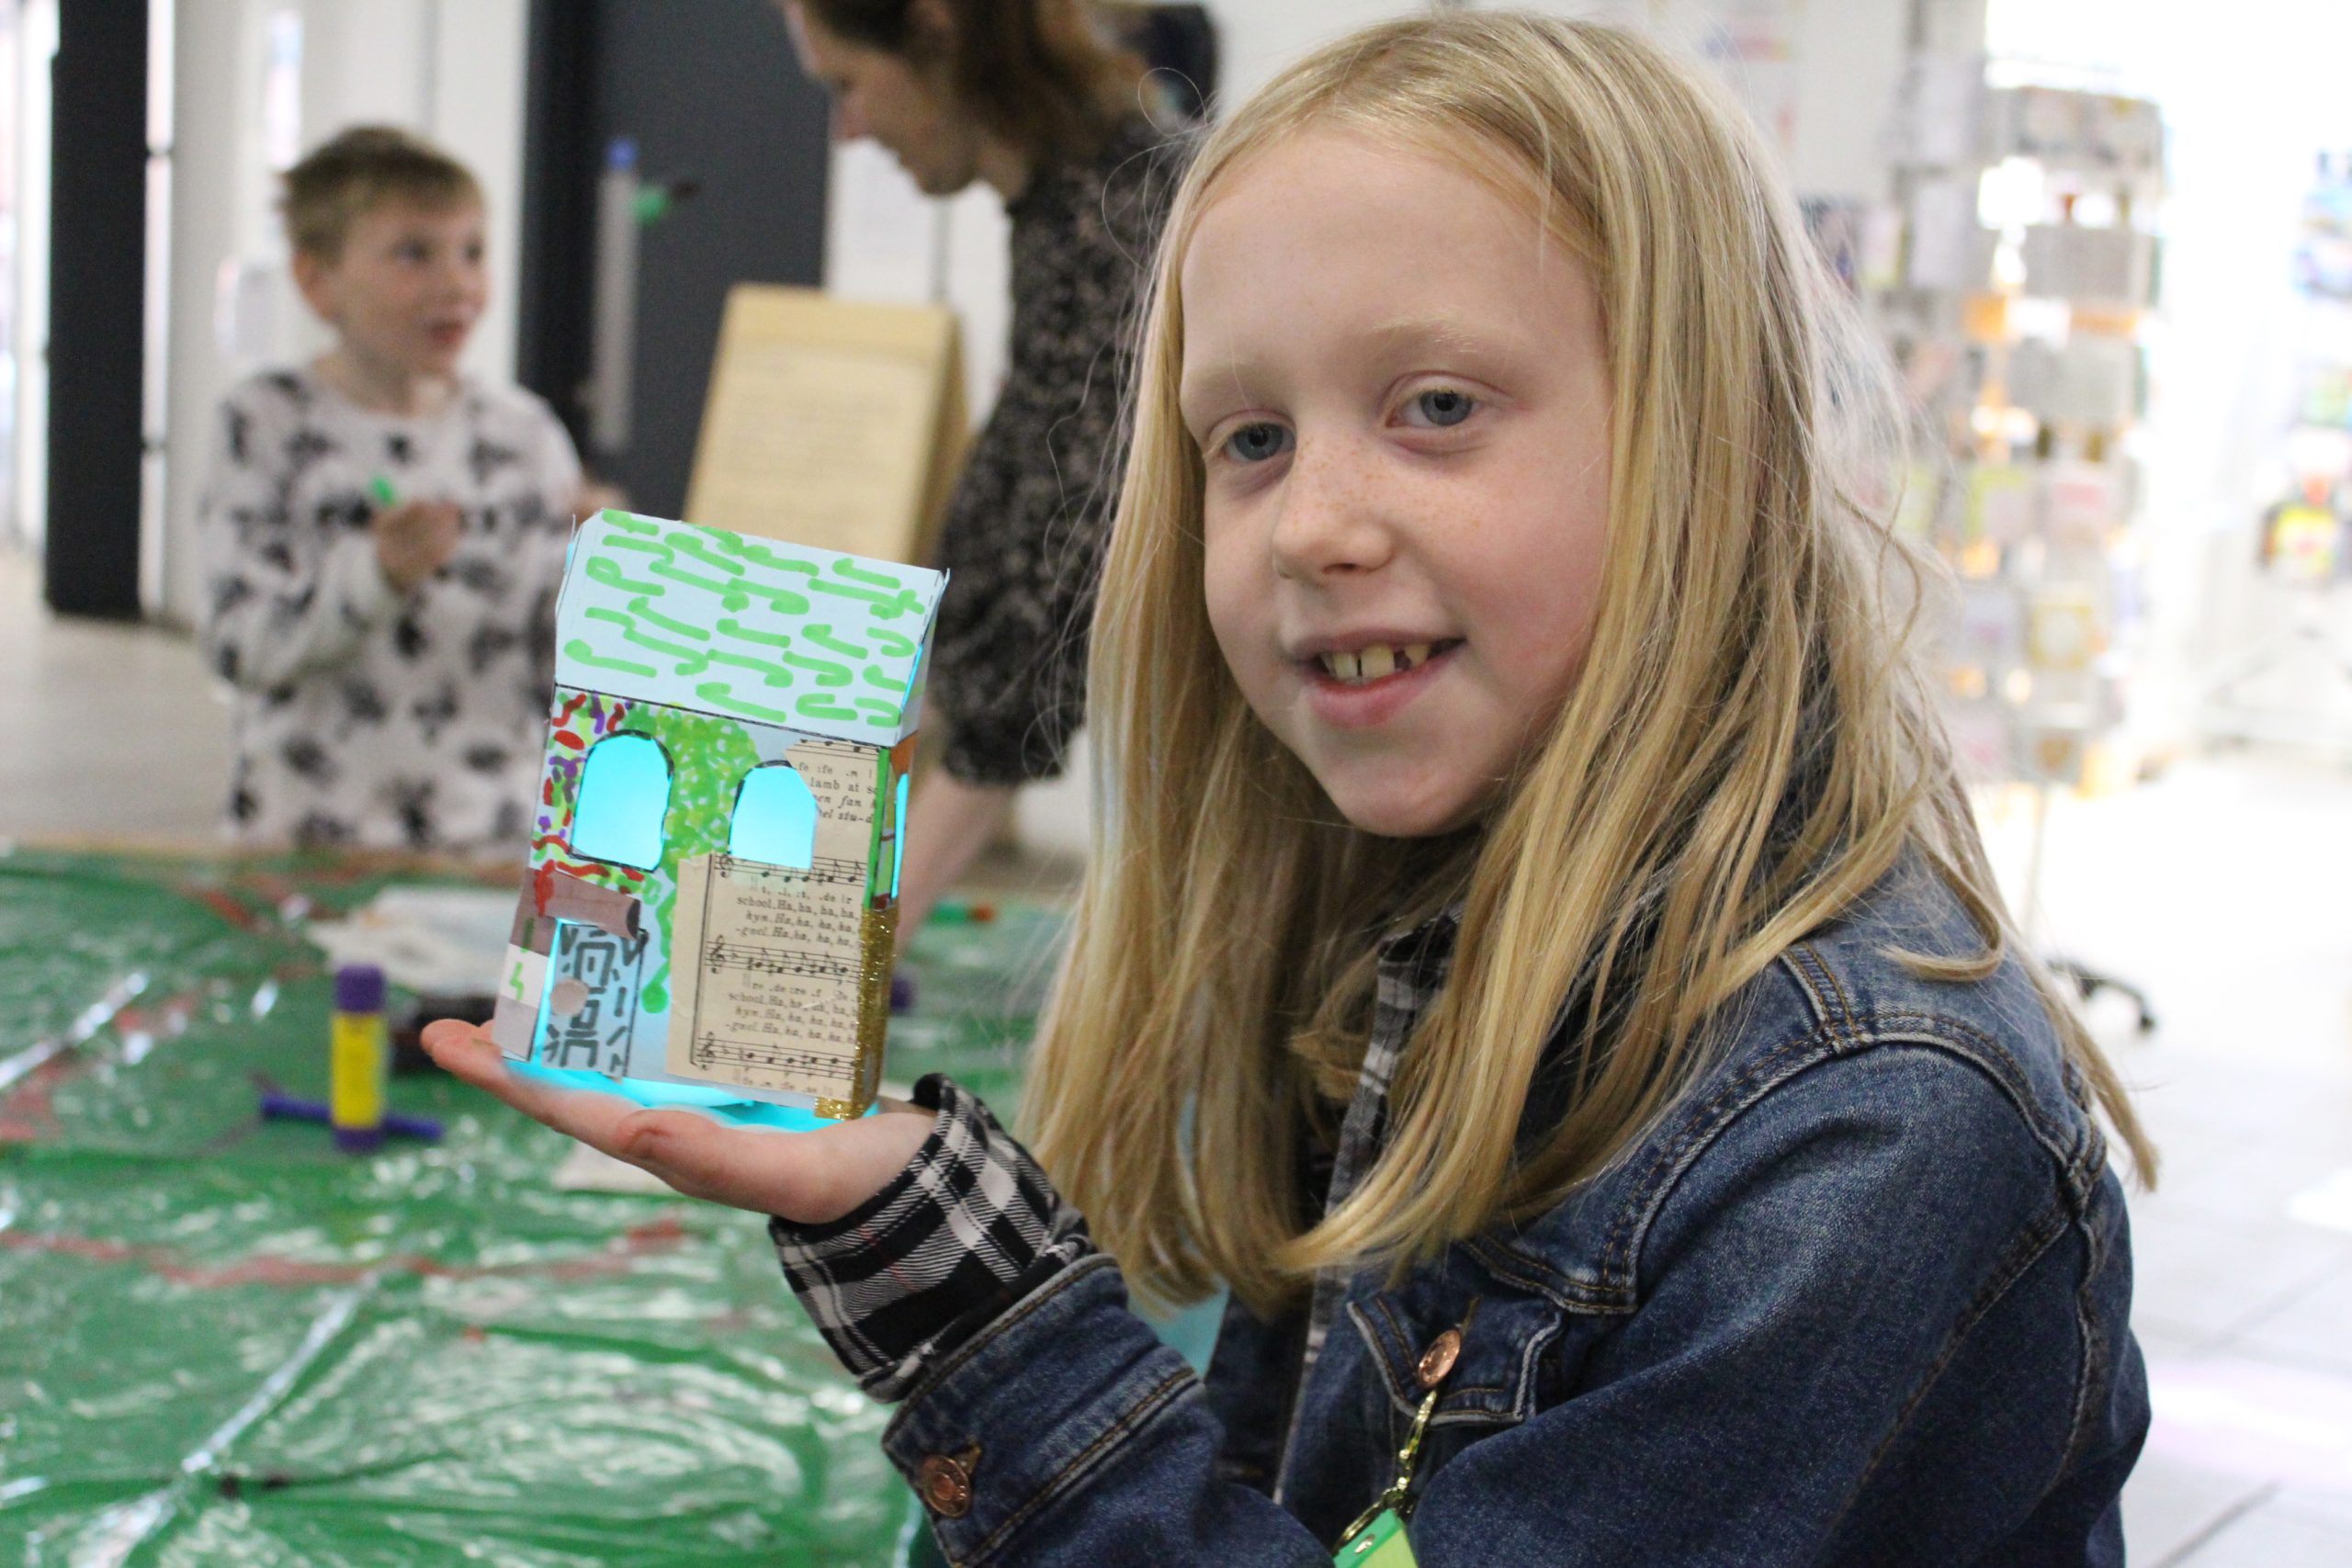 A tween girl holds up a light up house that she has made from card and decorated.